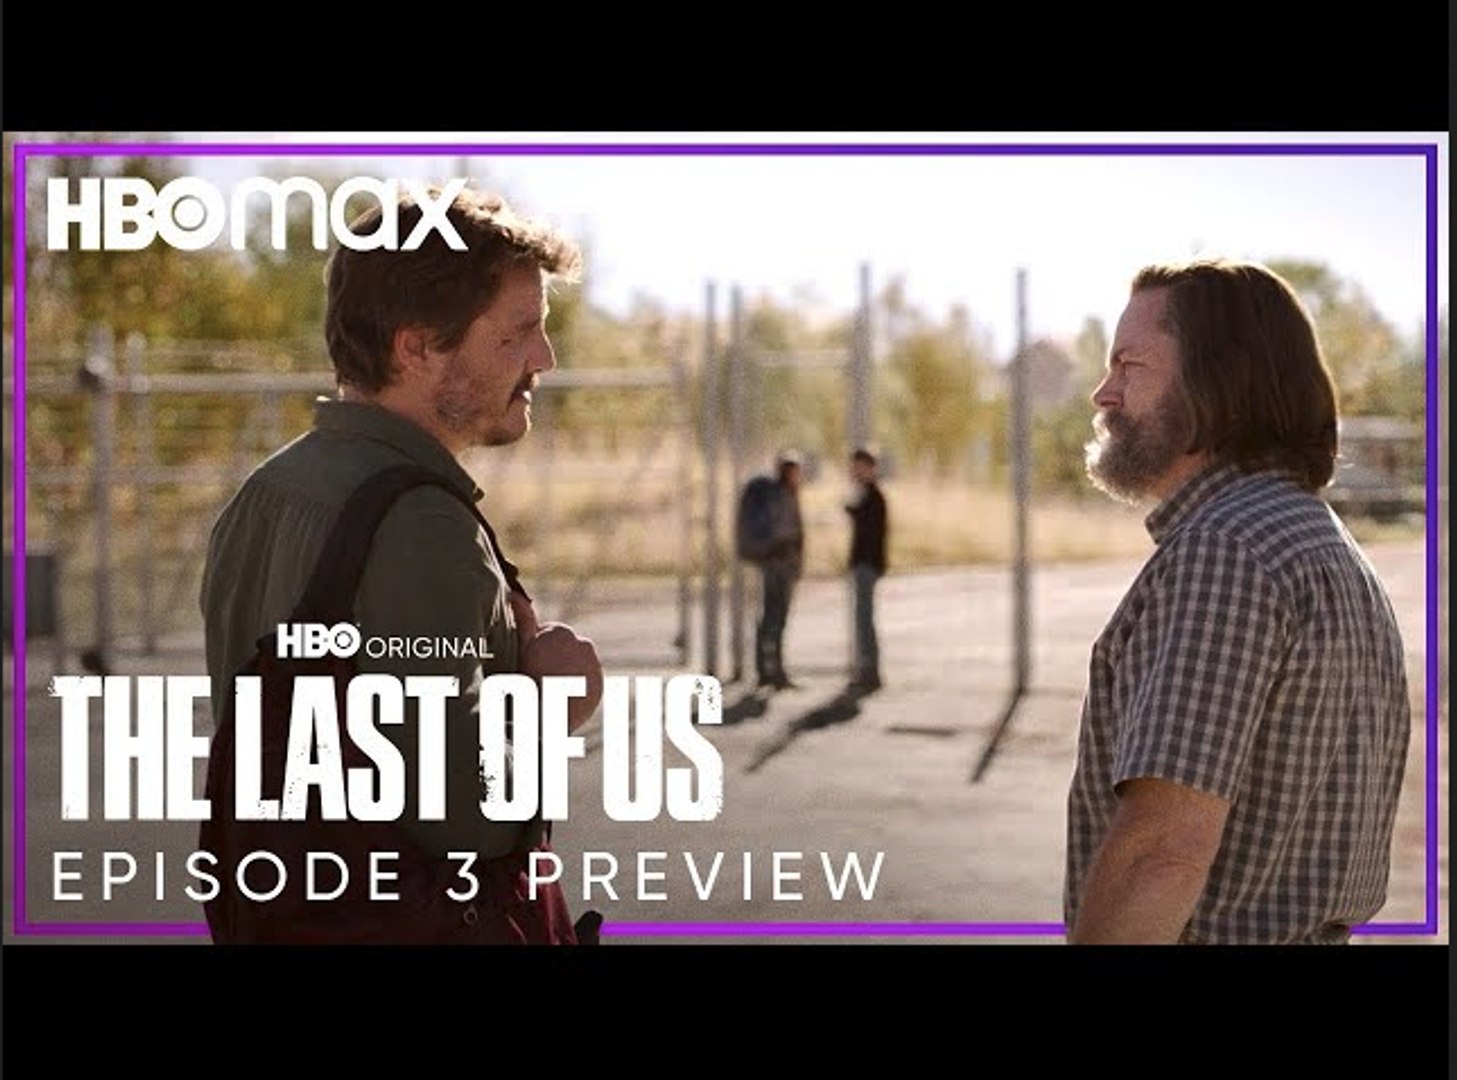 The Last of Us EPISODE 4 TRAILER - HBO Max - video Dailymotion